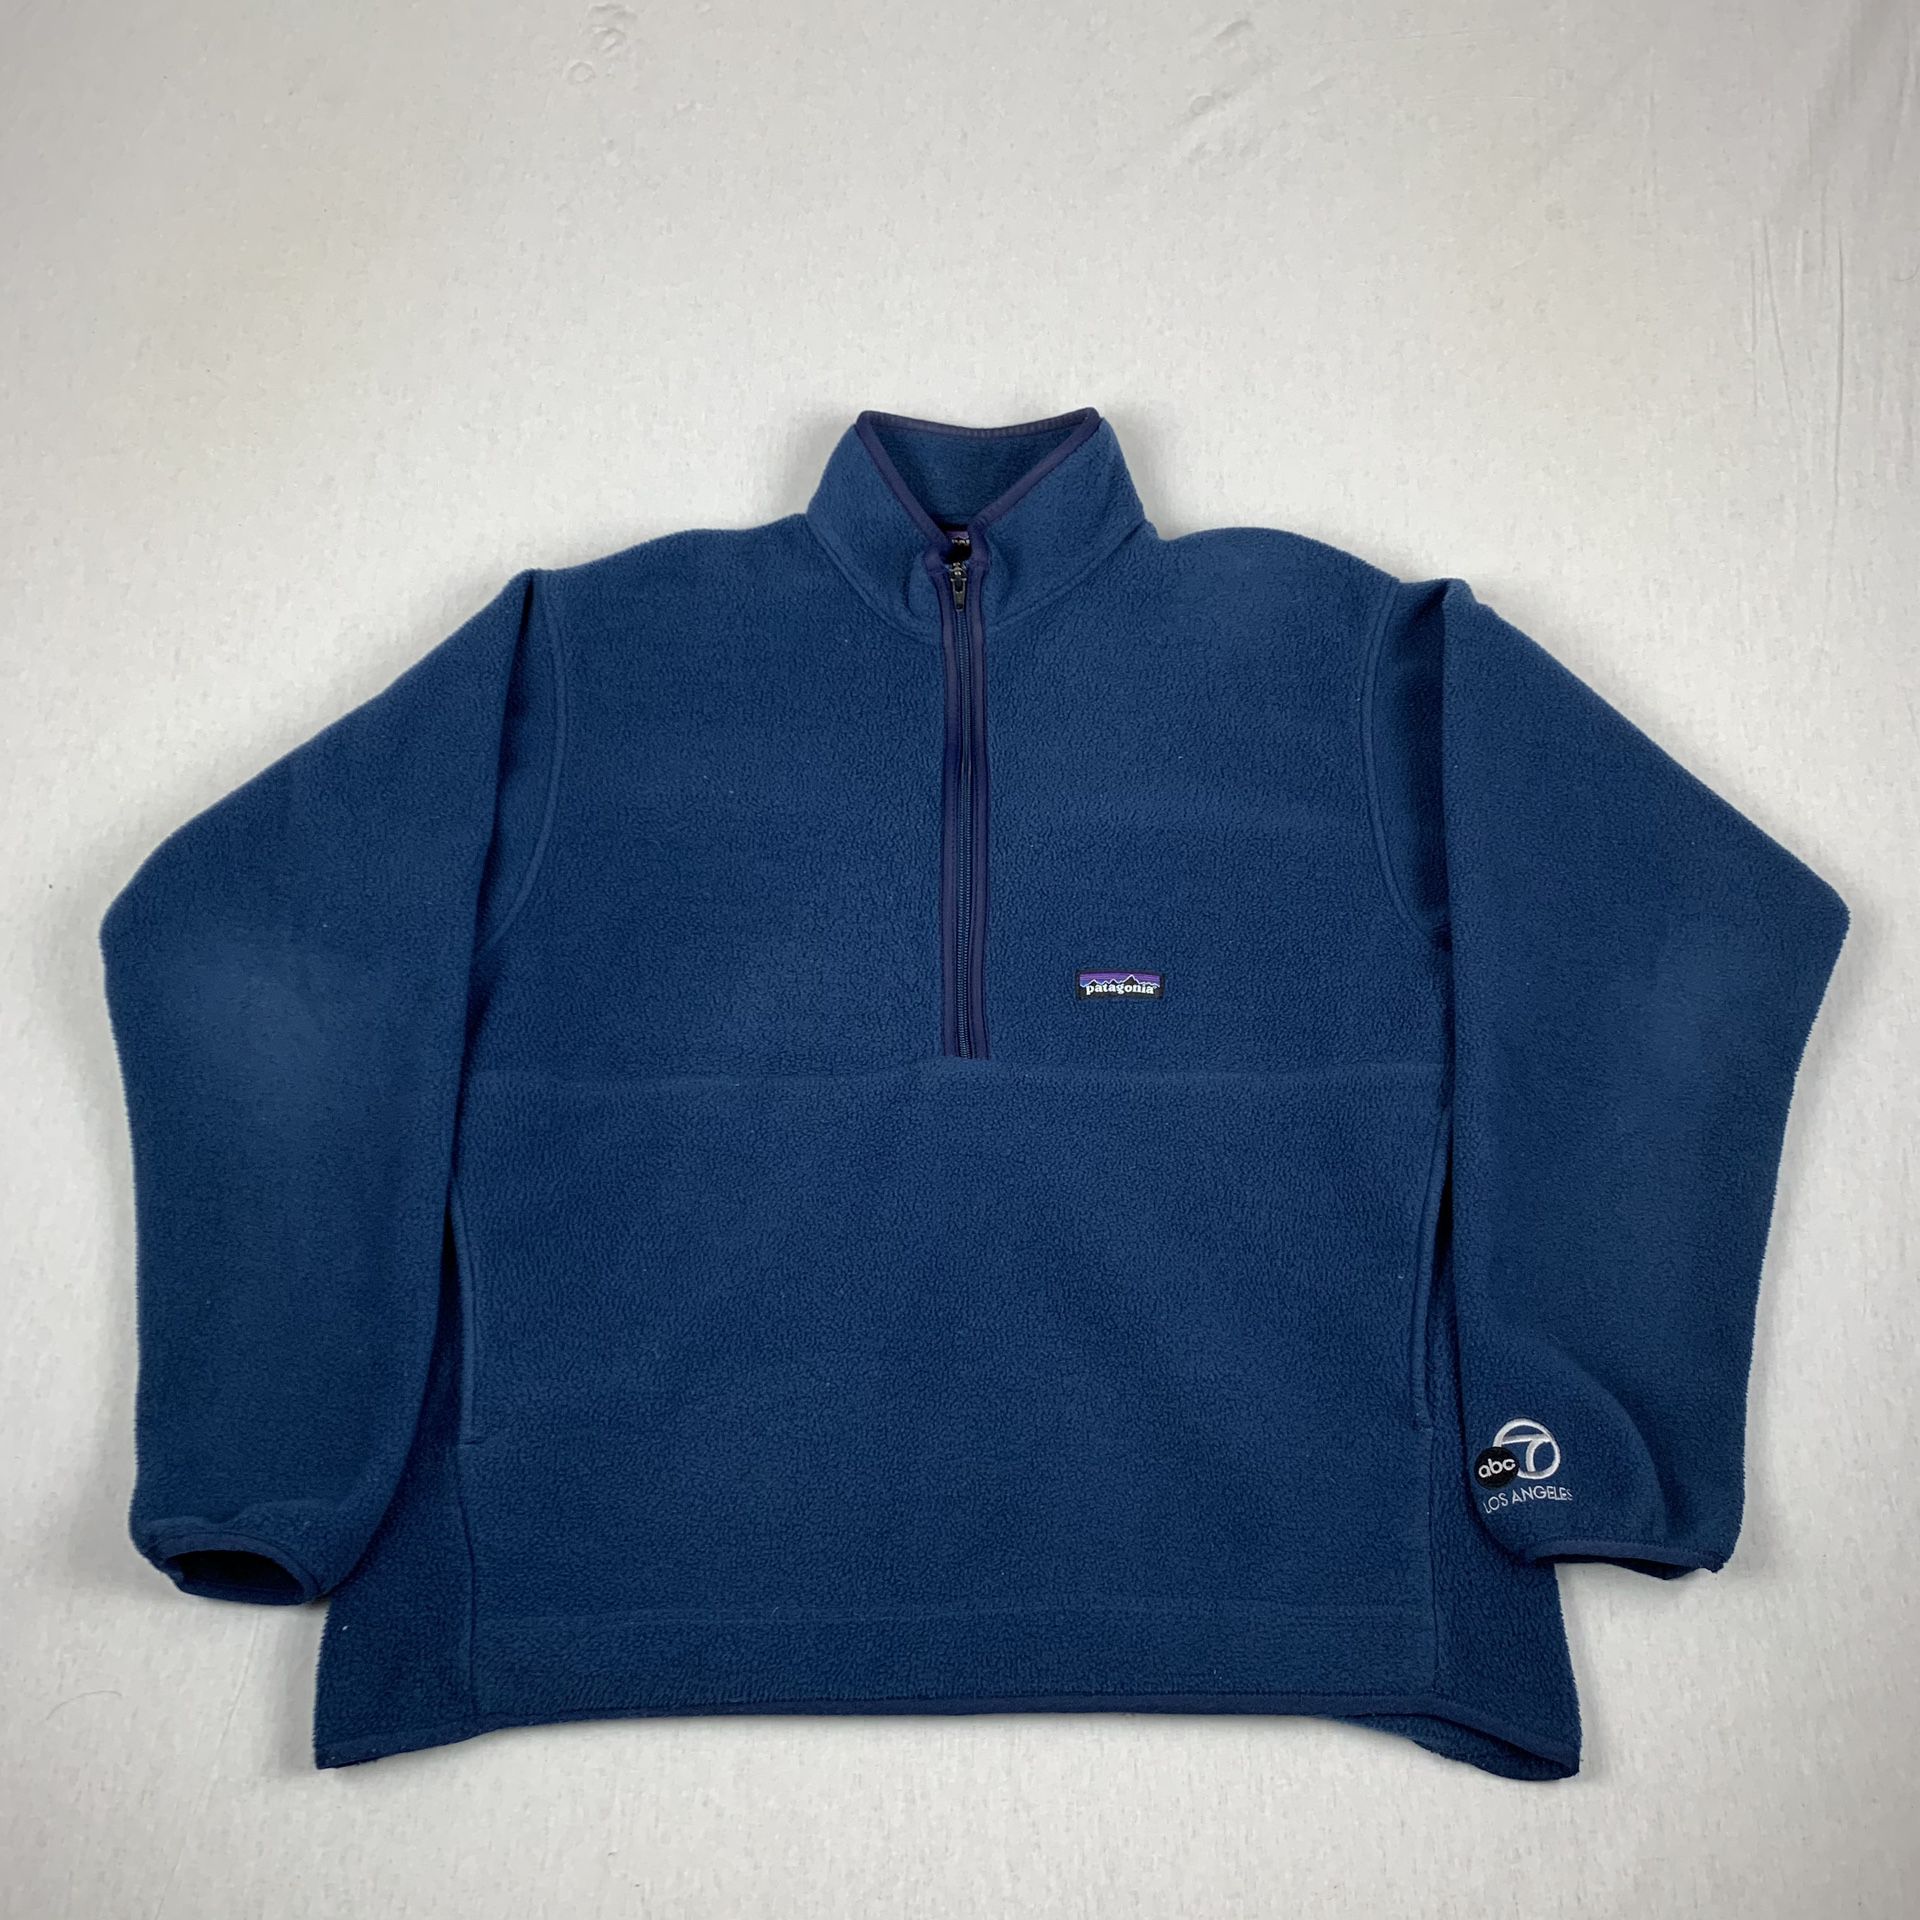 Patagonia Synchilla Navy Fleece Half Zip Pullover Sweater Size Large